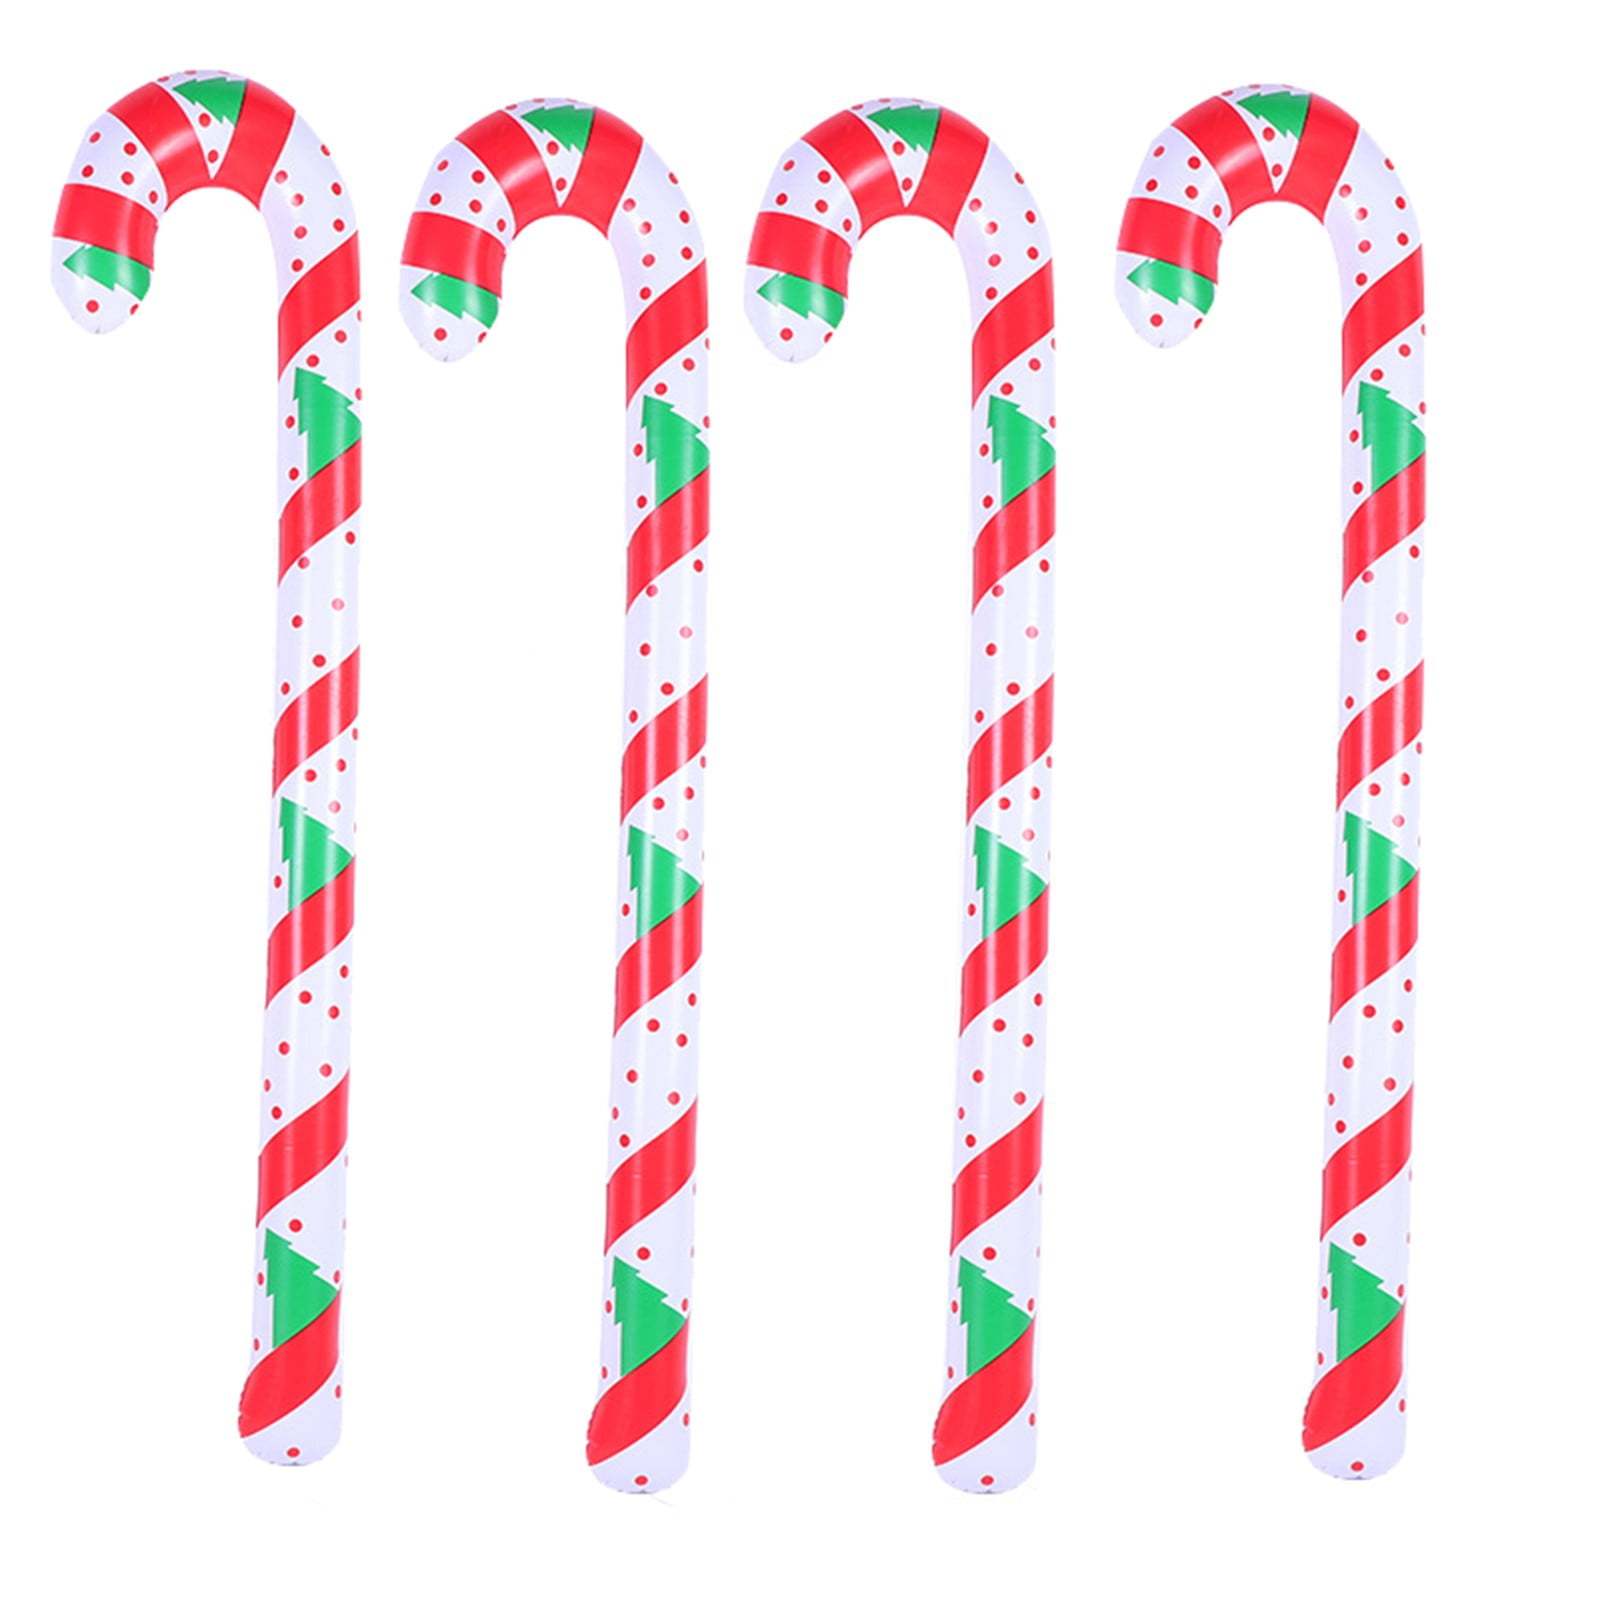 URATOT 6 Pieces Inflatable Candy Cane Stick Inflatable Candy Balloon Christmas Candy Cane for Christmas Decoration